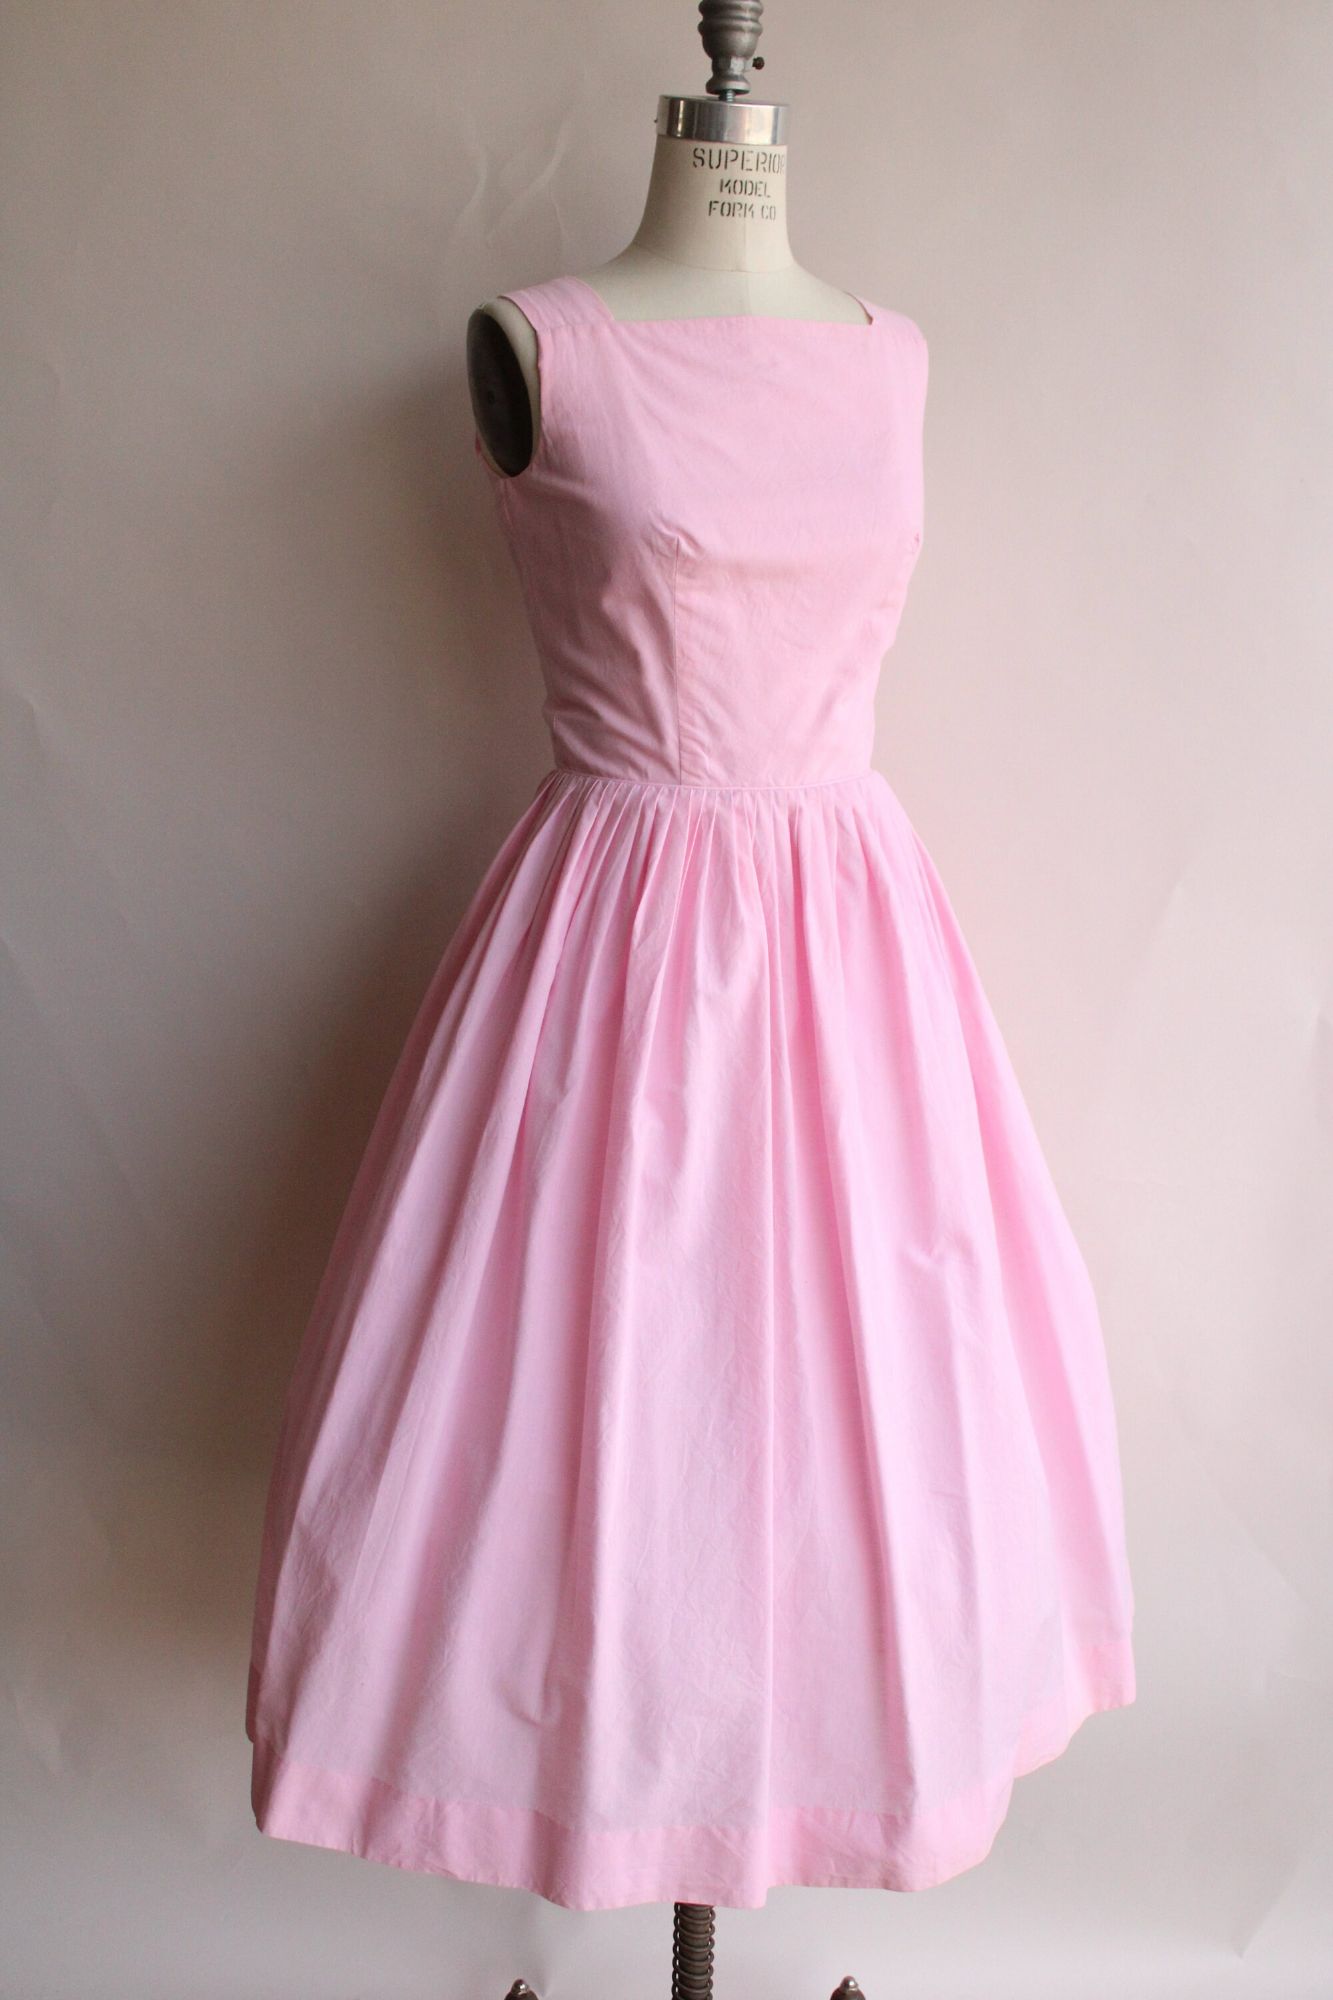 Vintage 1950s Martin Berens Tall Fashions Pink Cotton Sundress